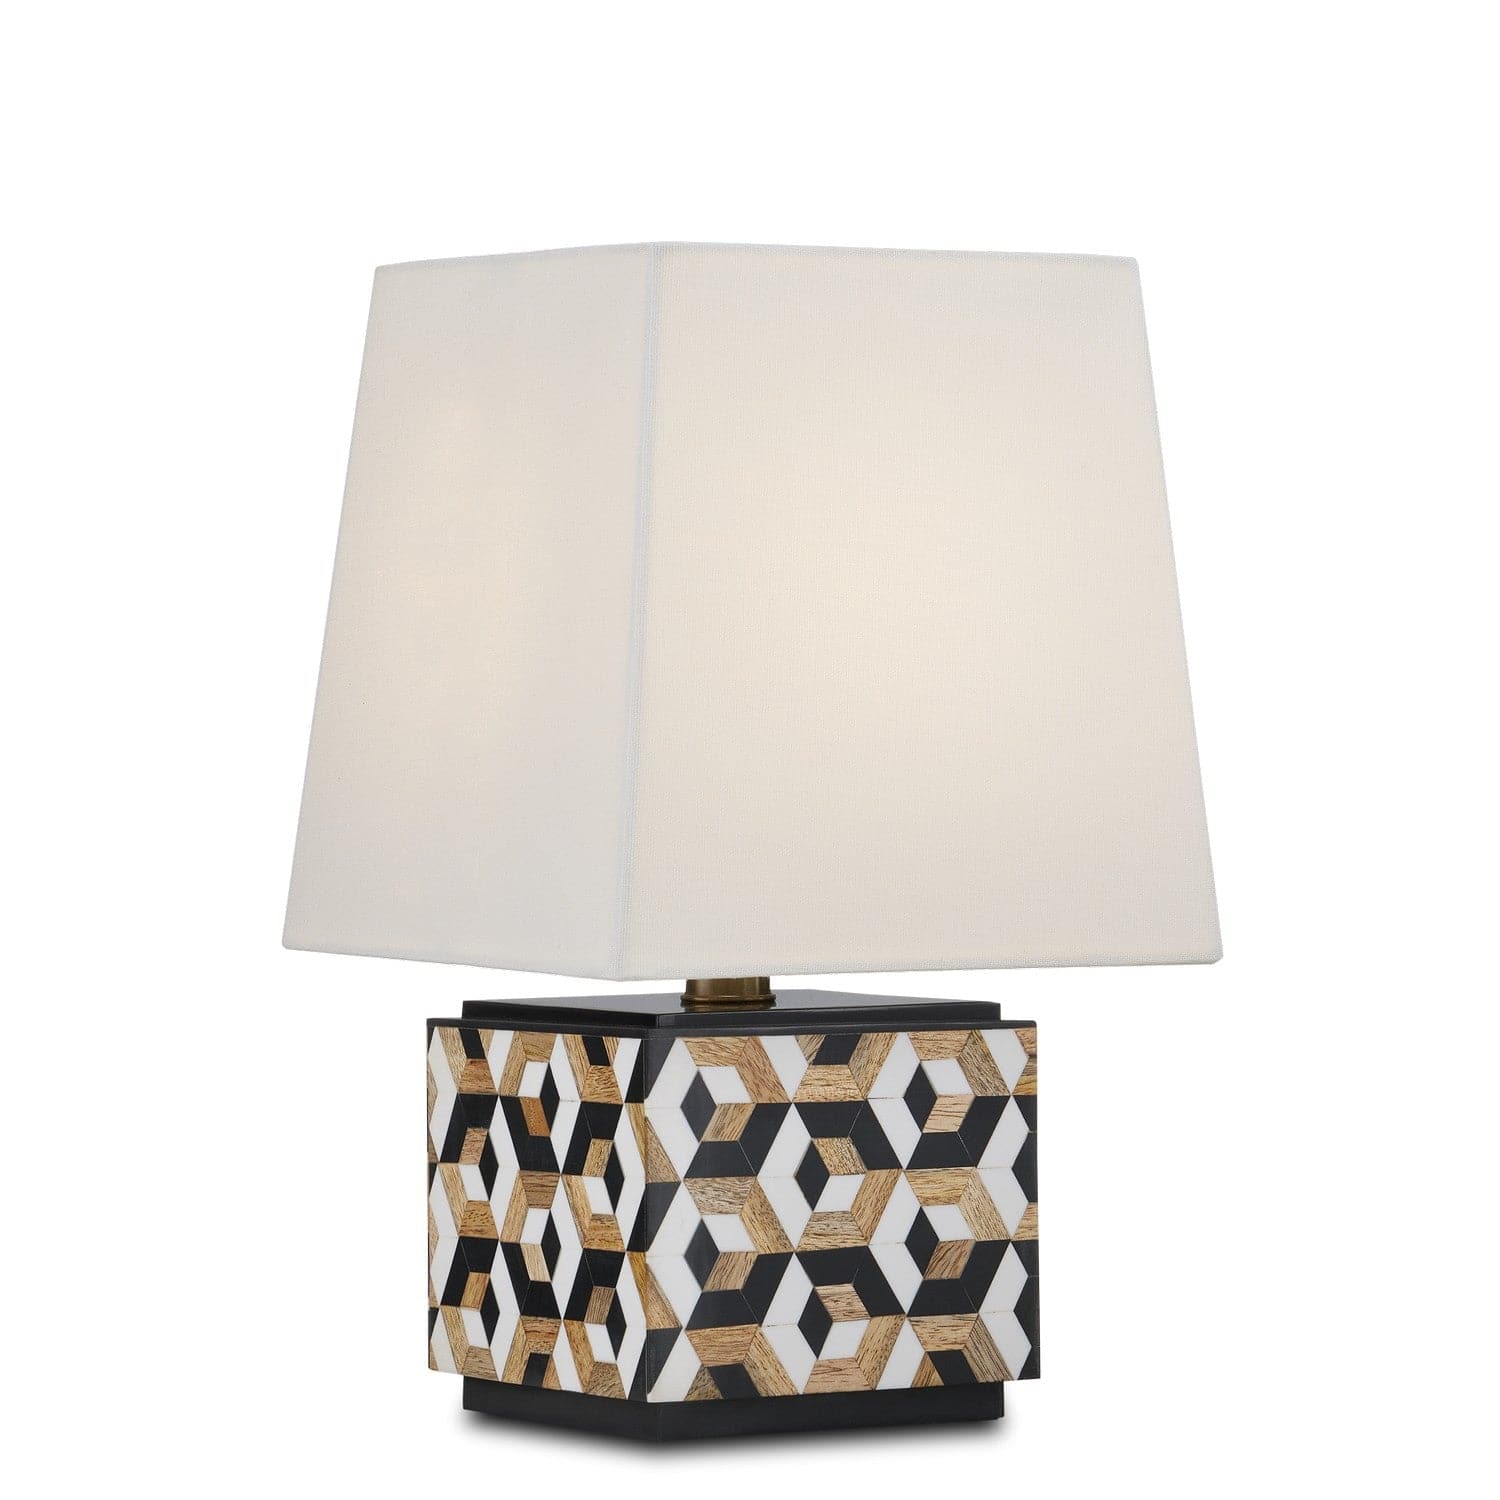 Currey and Company - 6000-0885 - One Light Table Lamp - Black/White/Natural